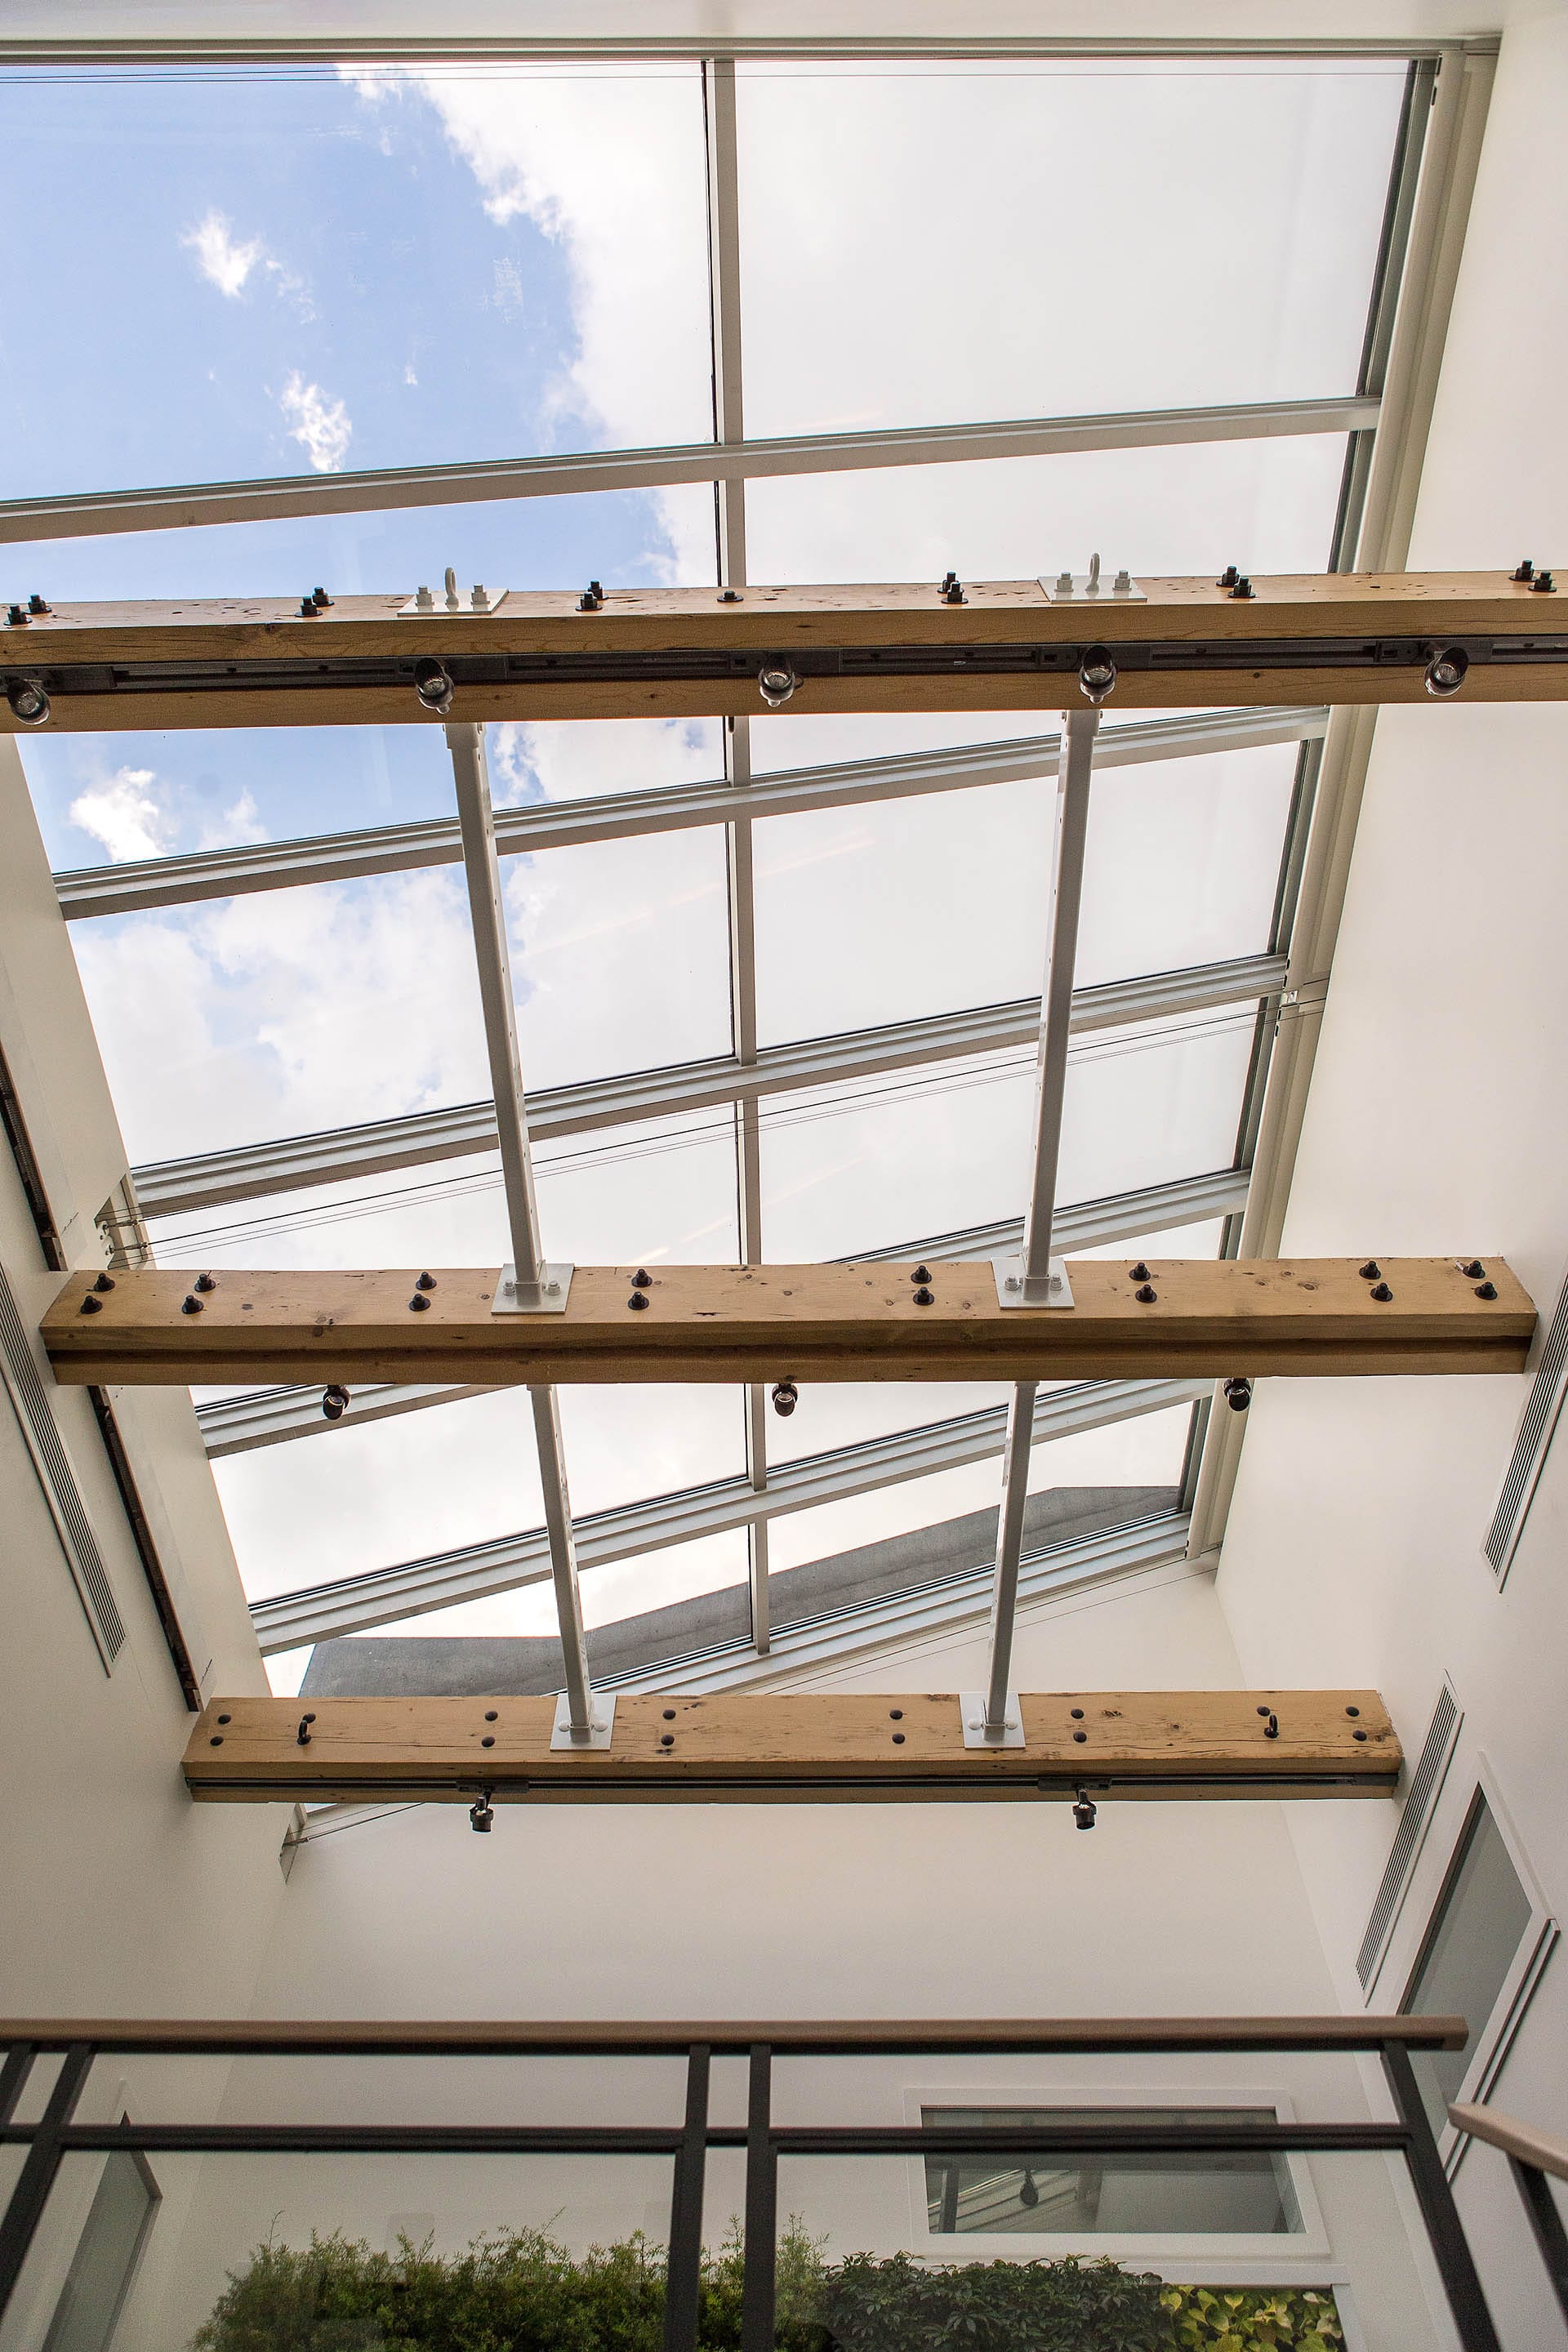 Large skylight with wooden beams supporting track lights.